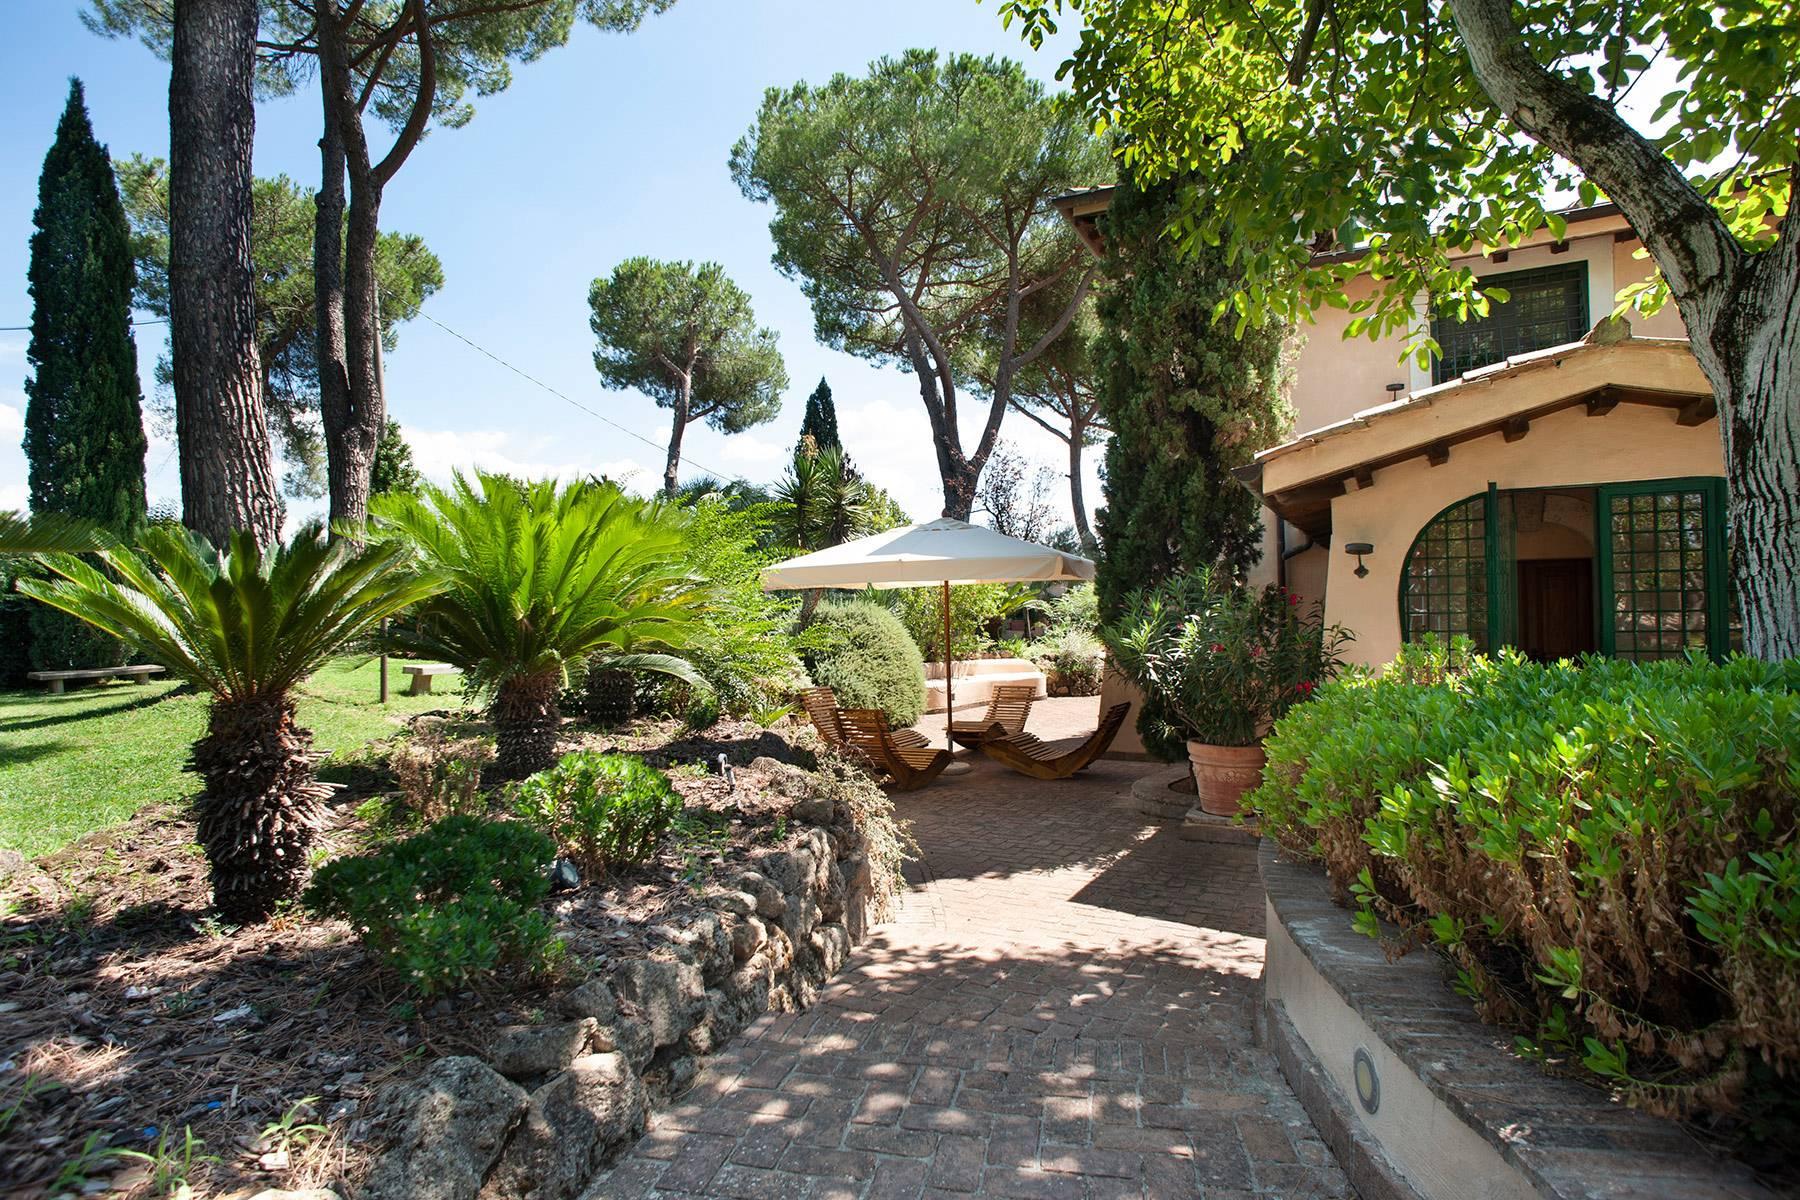 Villa Nayara - Lovely mansion with swimming pool 30 minutes from Rome - 55